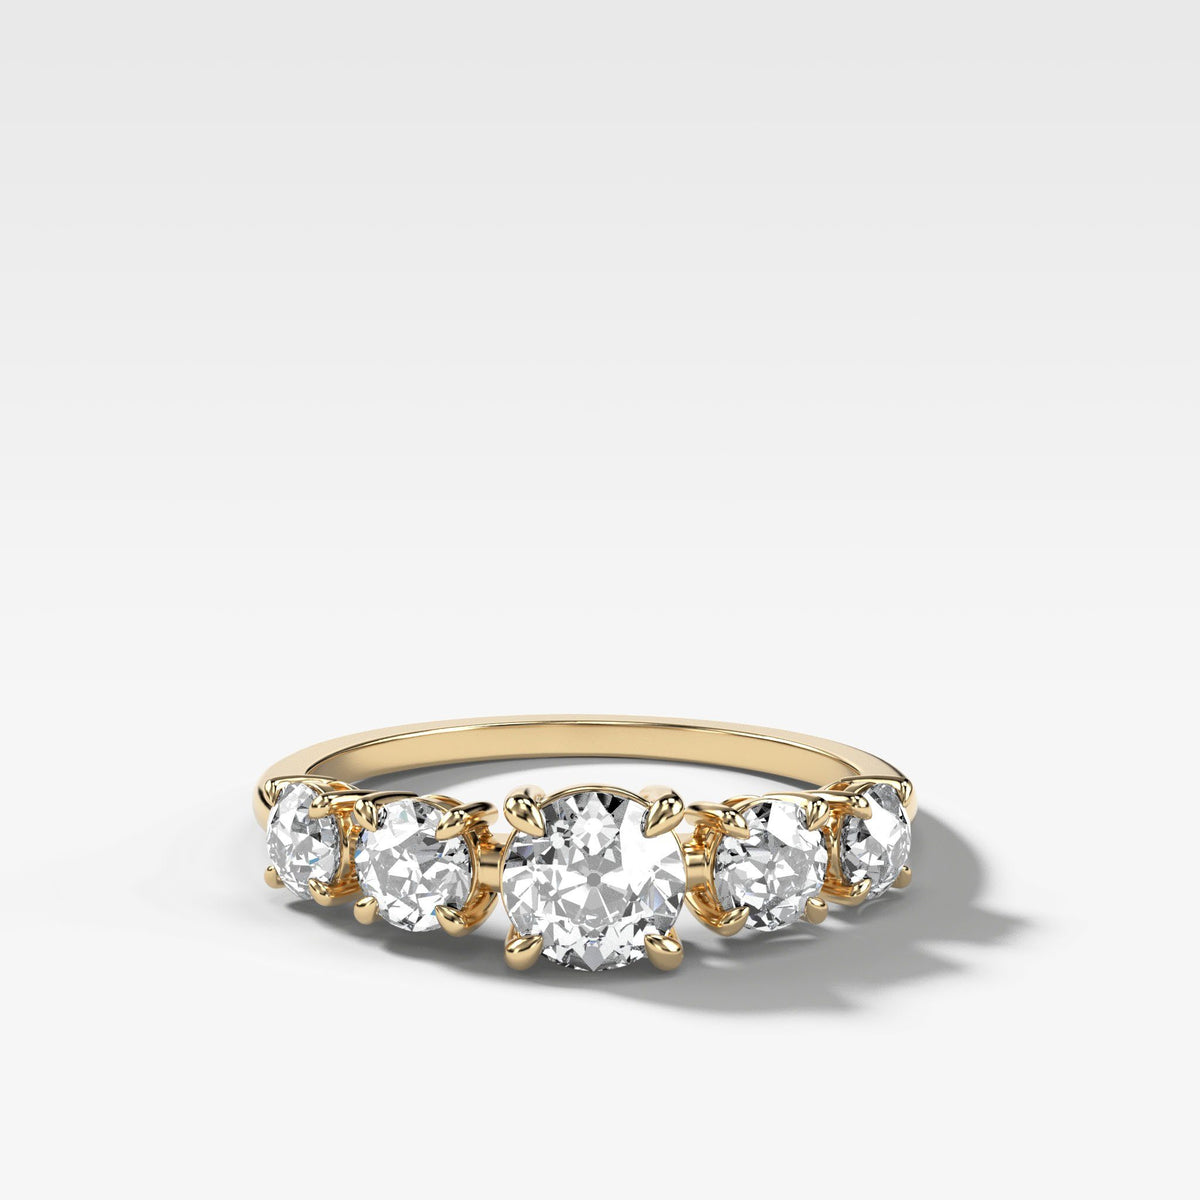 Graduated Five Stone ring with Old Euro Cut Diamonds by Good Stone in Yellow Gold